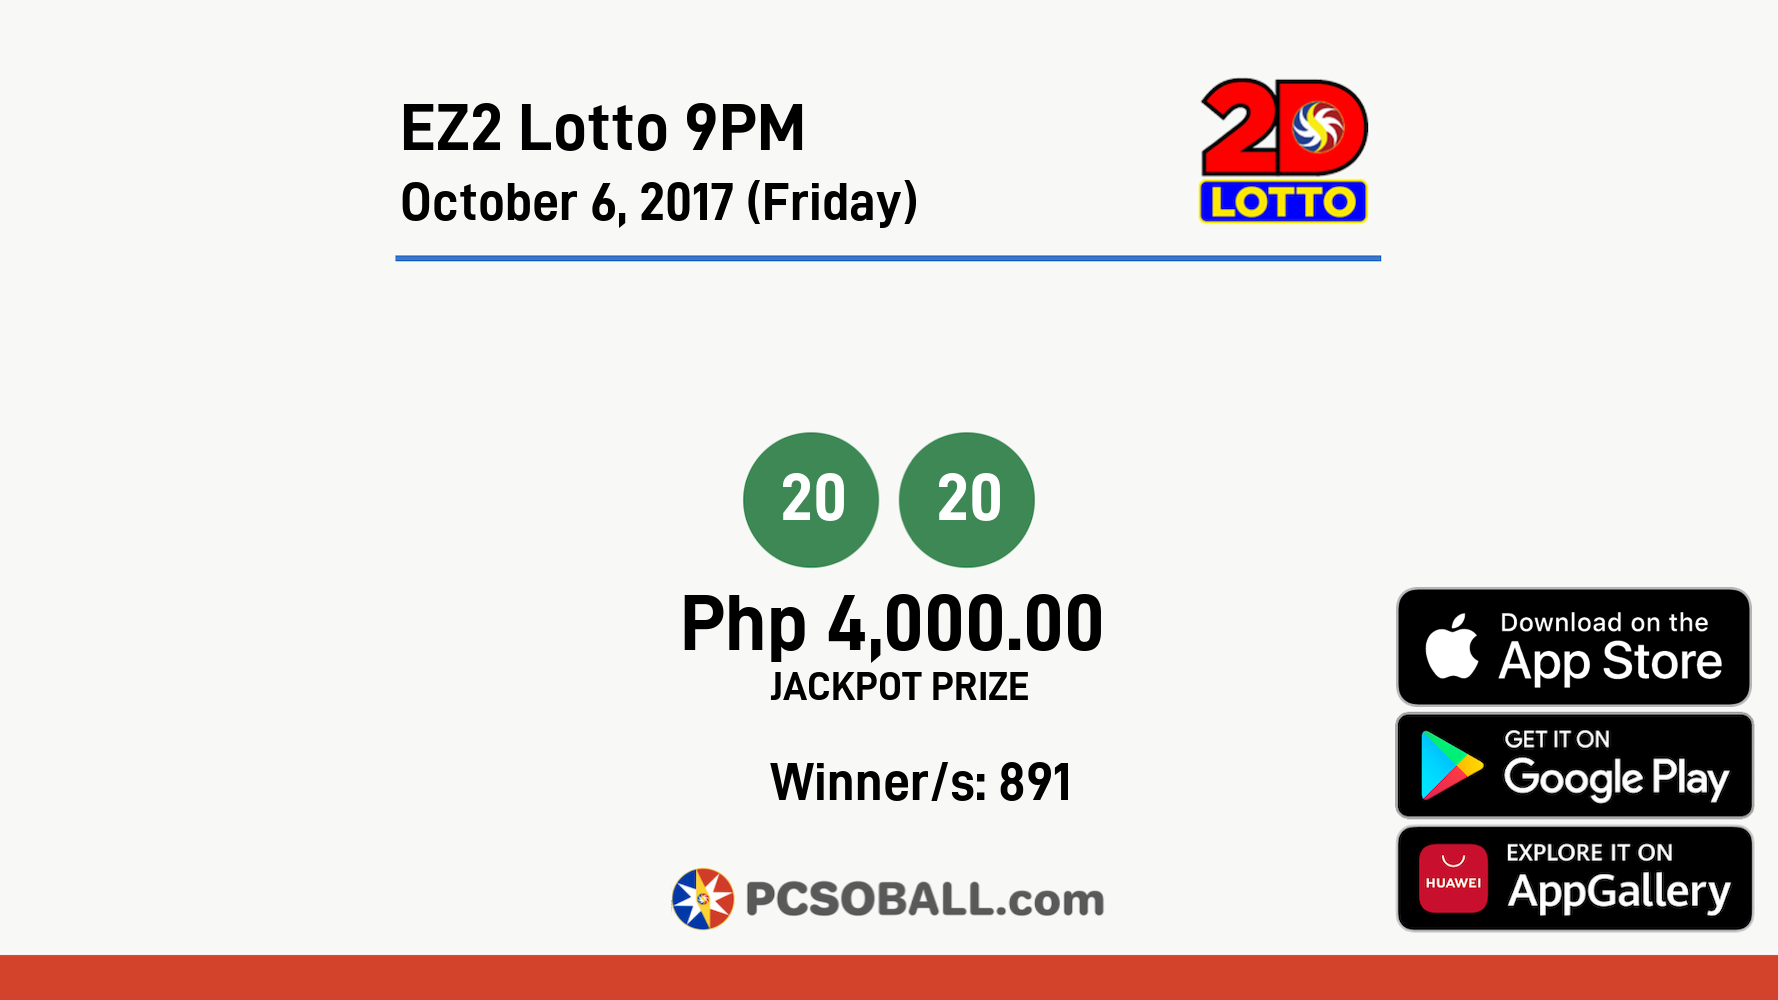 EZ2 Lotto 9PM October 6, 2017 (Friday) Result